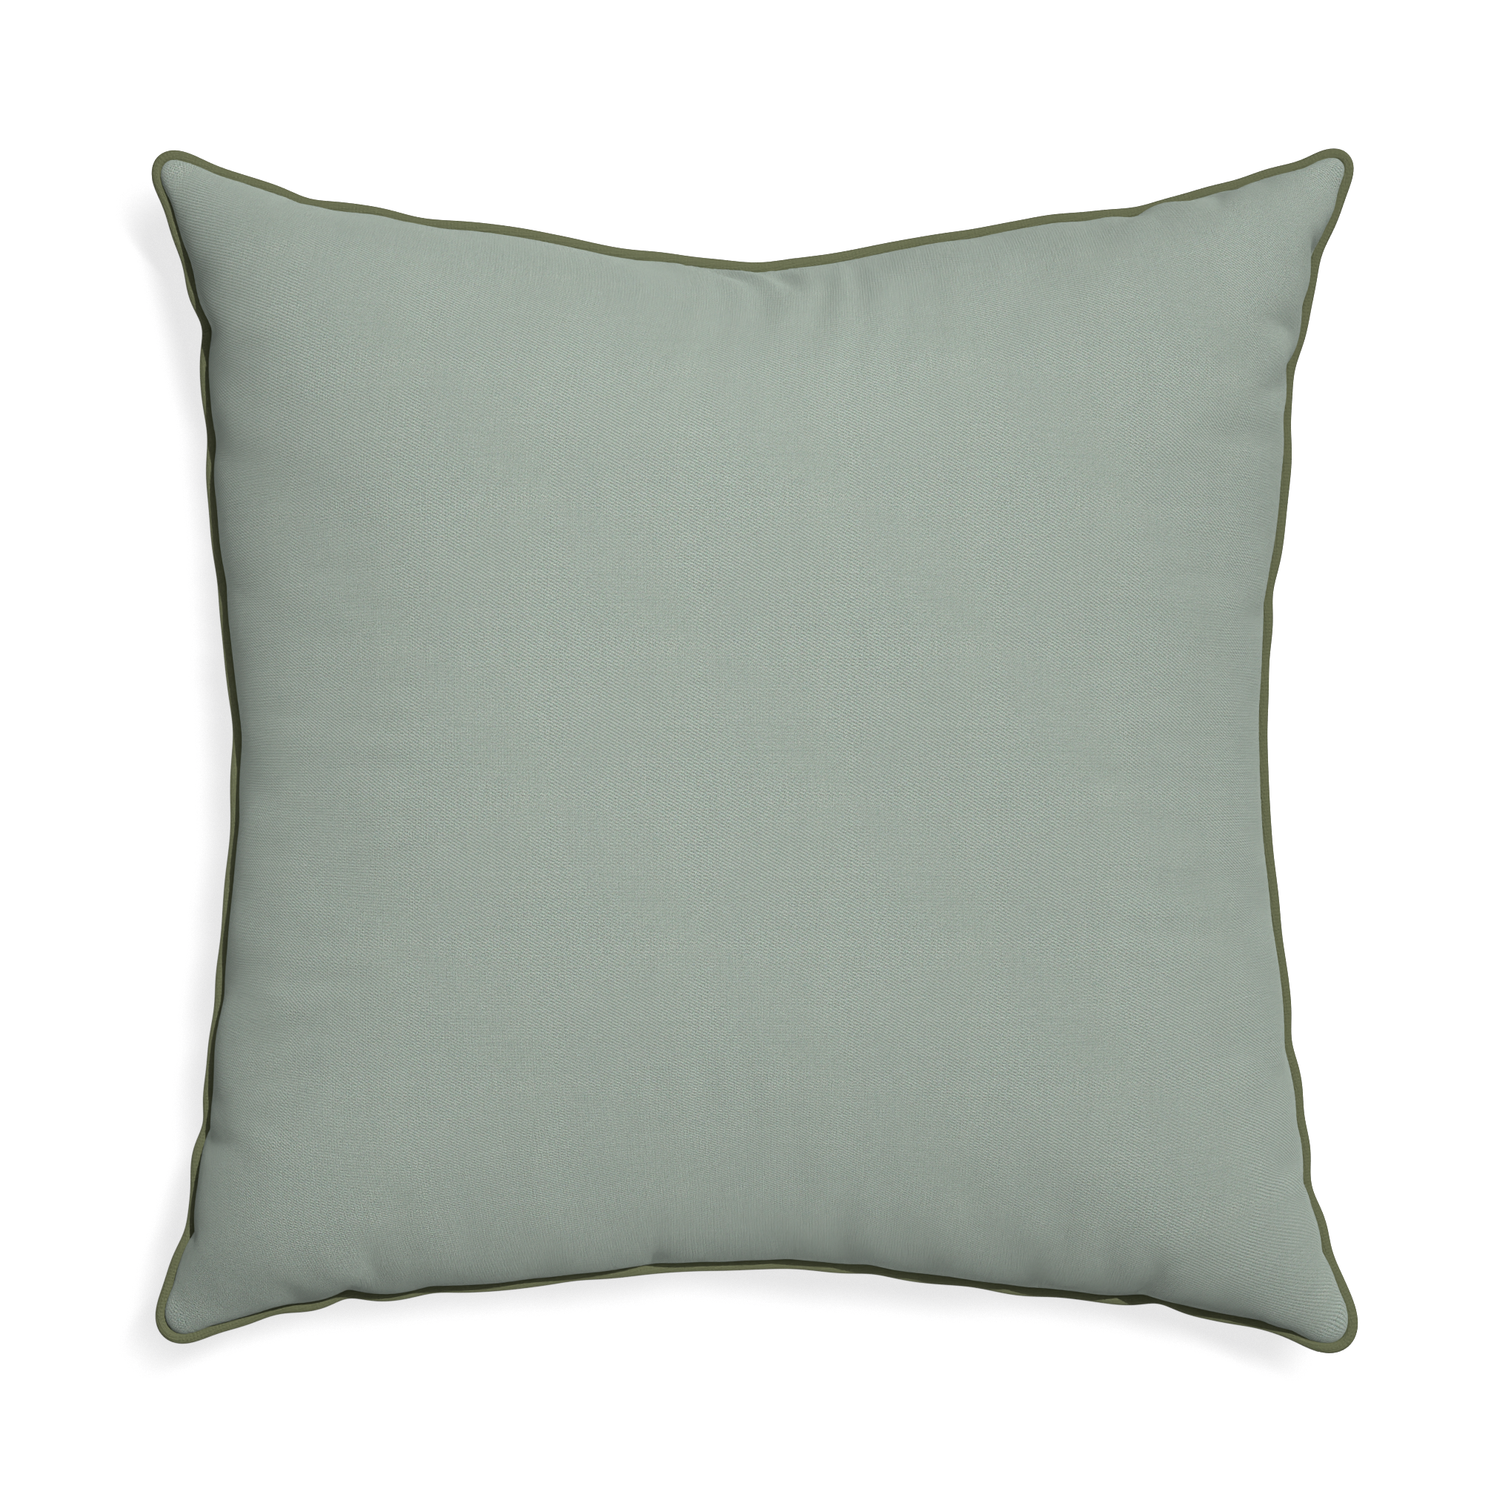 Euro-sham sage custom pillow with f piping on white background